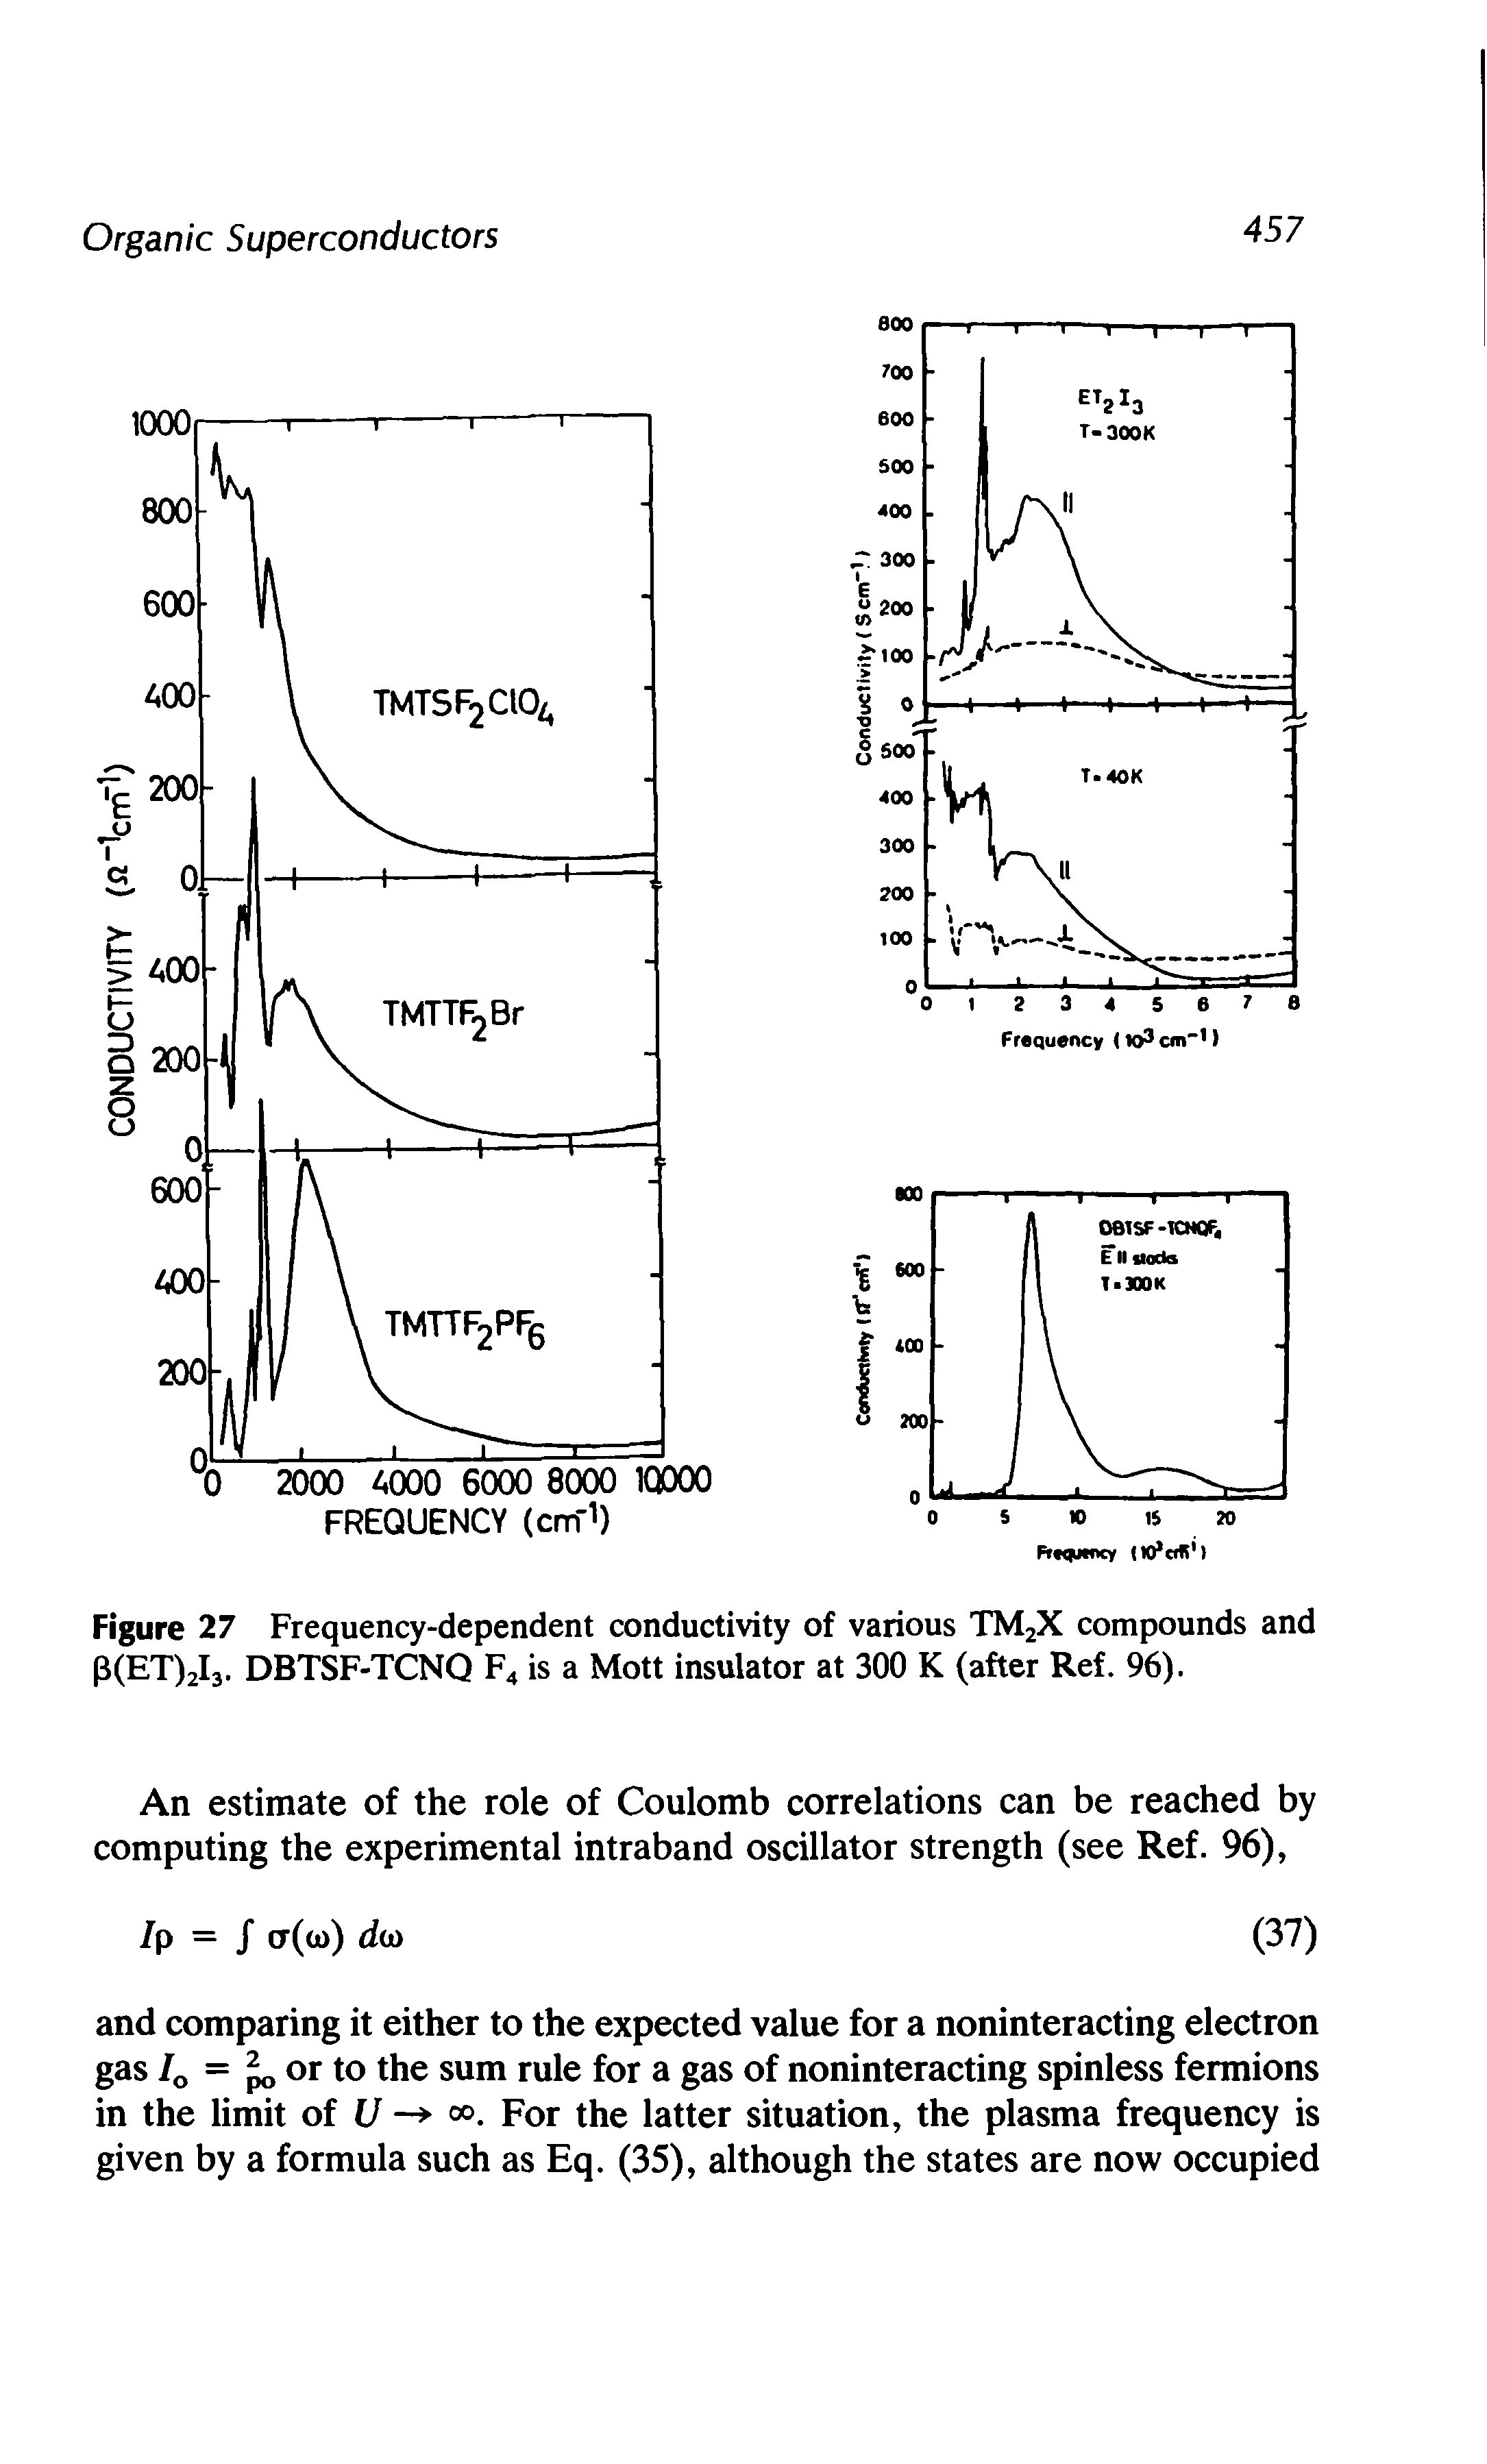 Figure 27 Frequency-dependent conductivity of various TM2X compounds and 0(ET)2I3. DBTSF-TCNQ F4 is a Mott insulator at 300 K (after Ref. 96).